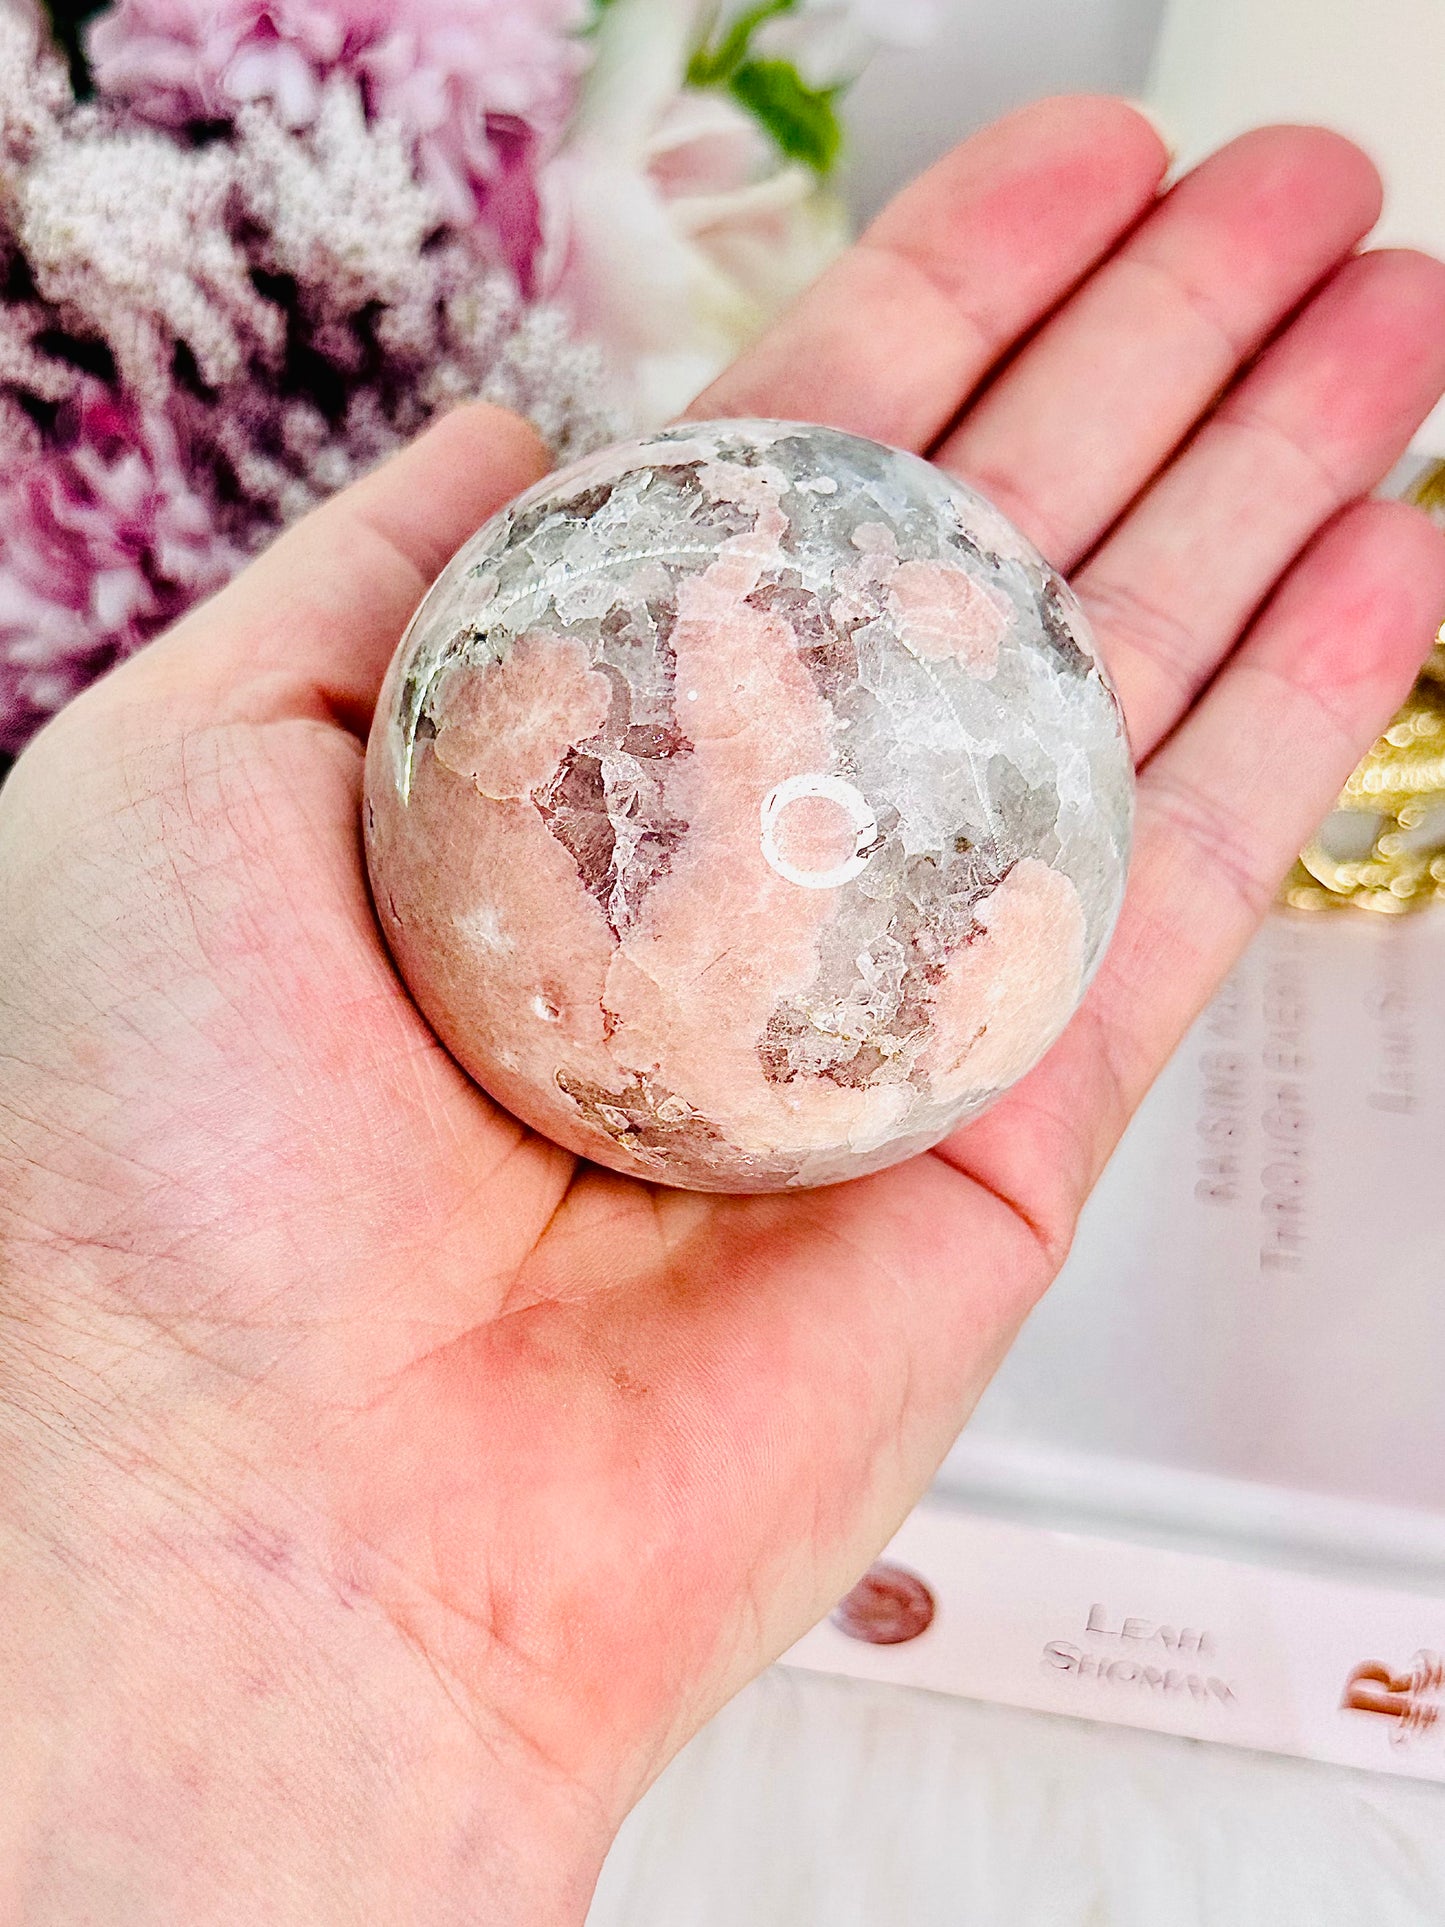 Spectacular & Unique Stunning Druzy Pink Amethyst Sphere From Brazil (5cm) A Gorgeous Magical Piece On Silver Stand